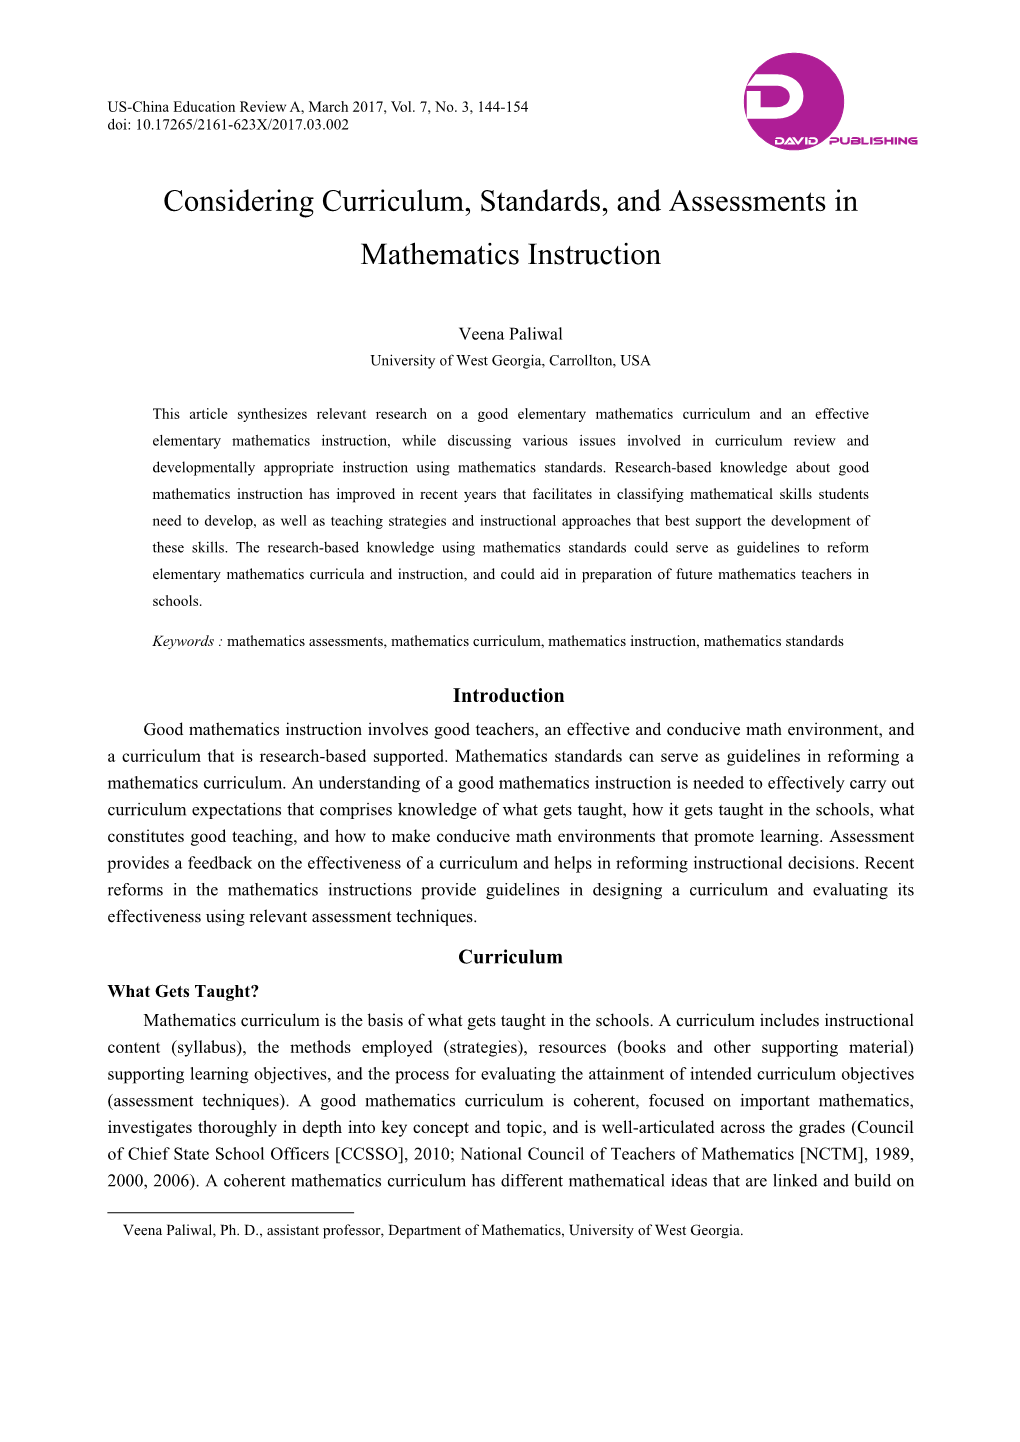 Considering Curriculum, Standards, and Assessments in Mathematics Instruction